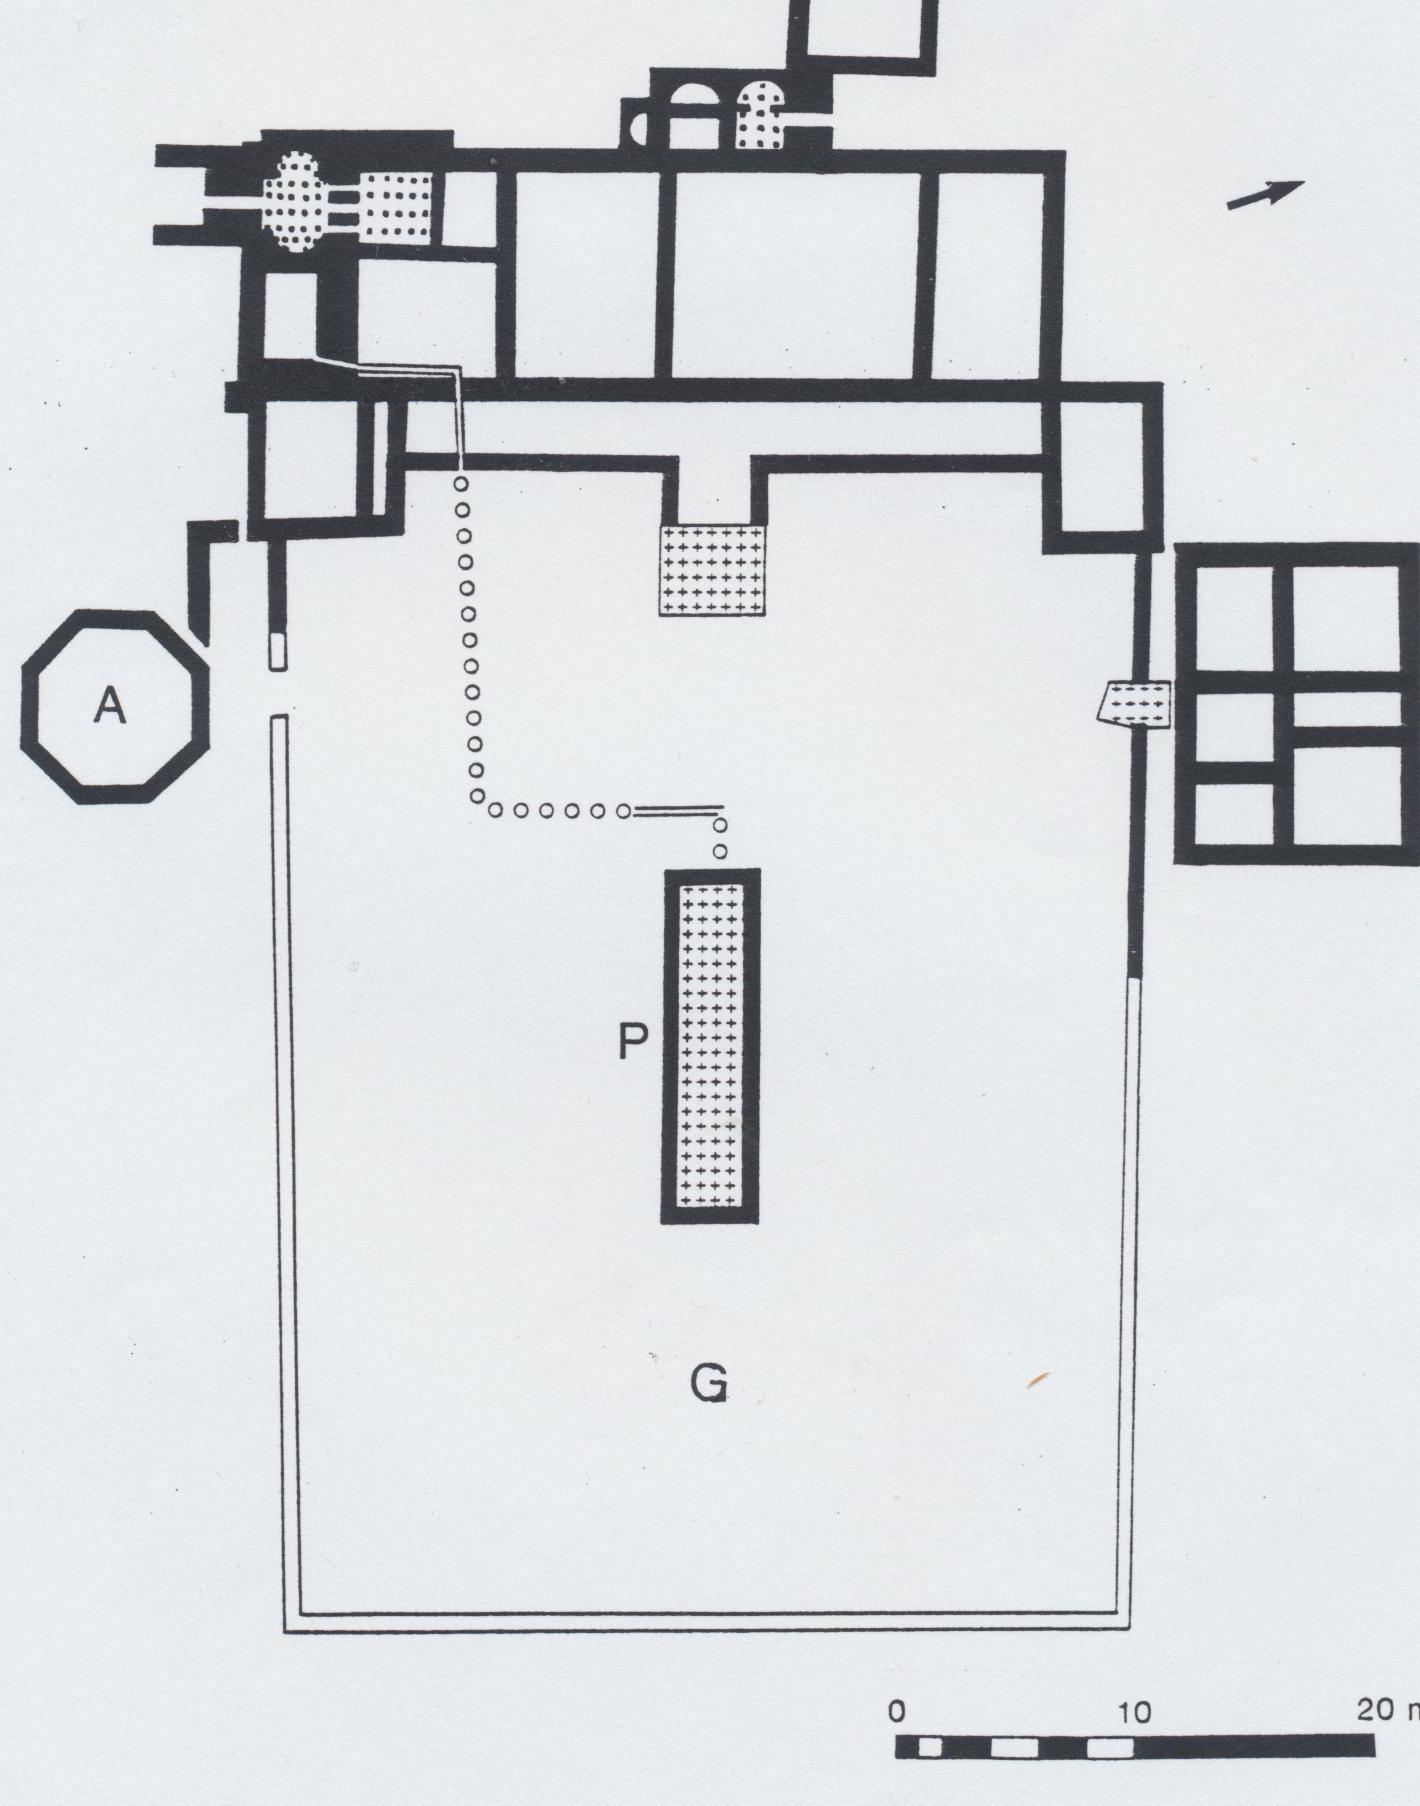 Fig. 1: Plan of the villa with its garden courtyard (G), a central pool (P), and a possible gazebo (A). Adapted from Zeepvat 1991, fig. 5.4.